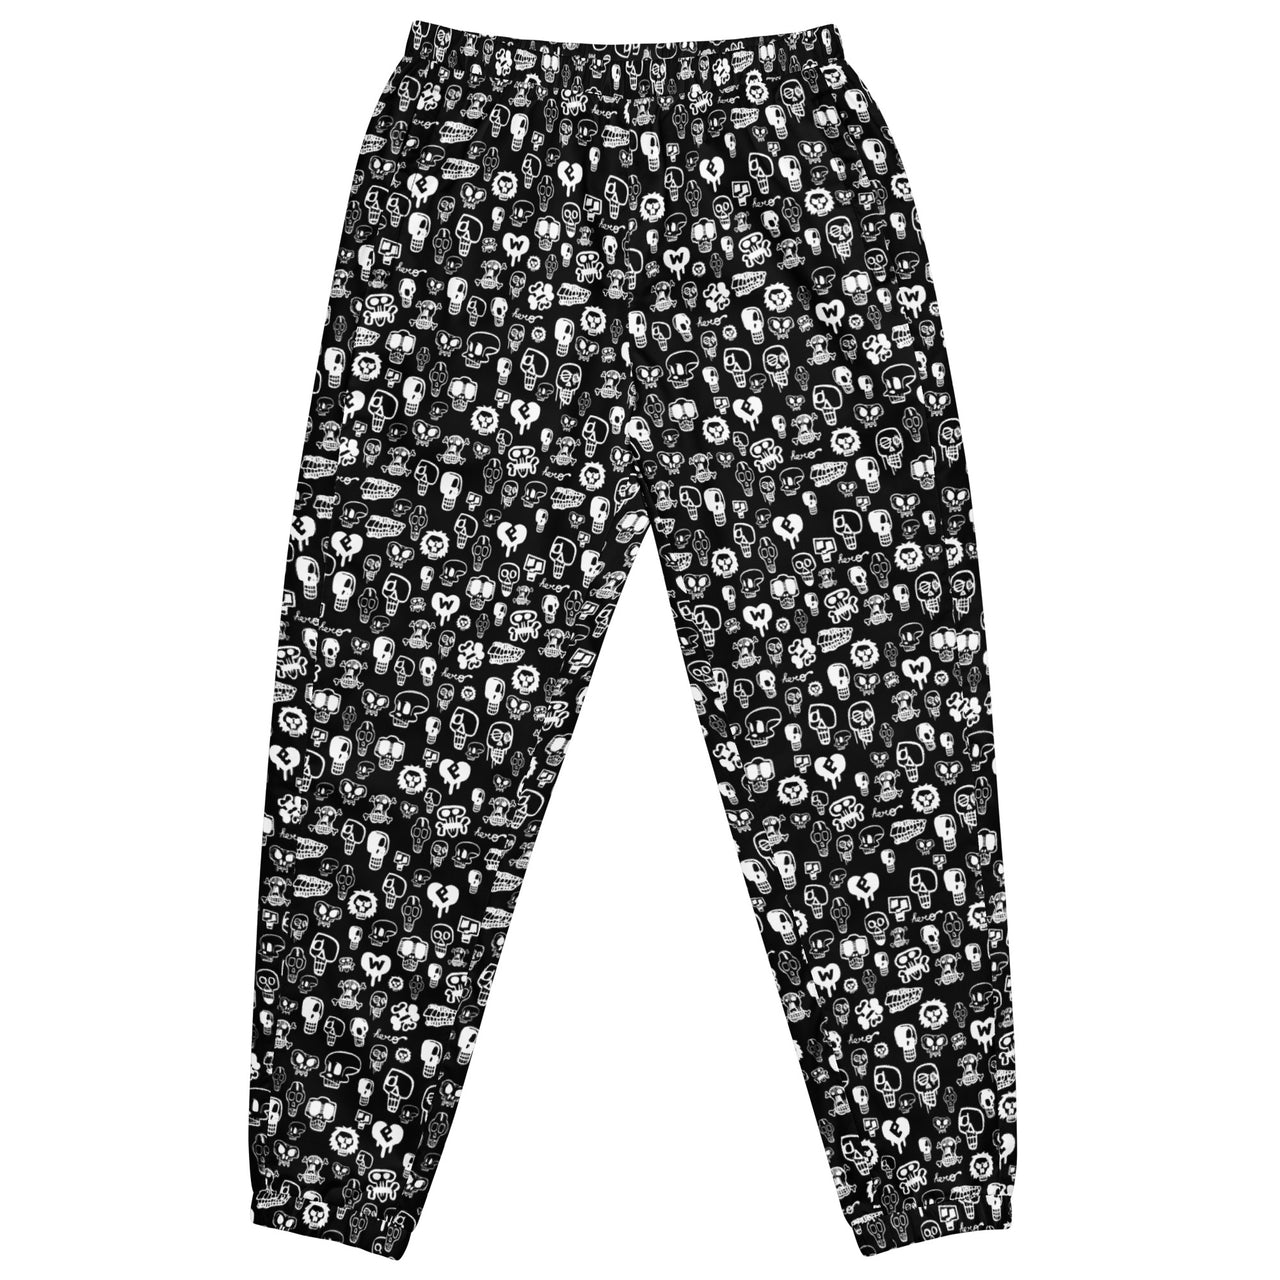 Skull Print Unisex Track Pants by HERO: Stand Out in Style and Comfort - Design Hero